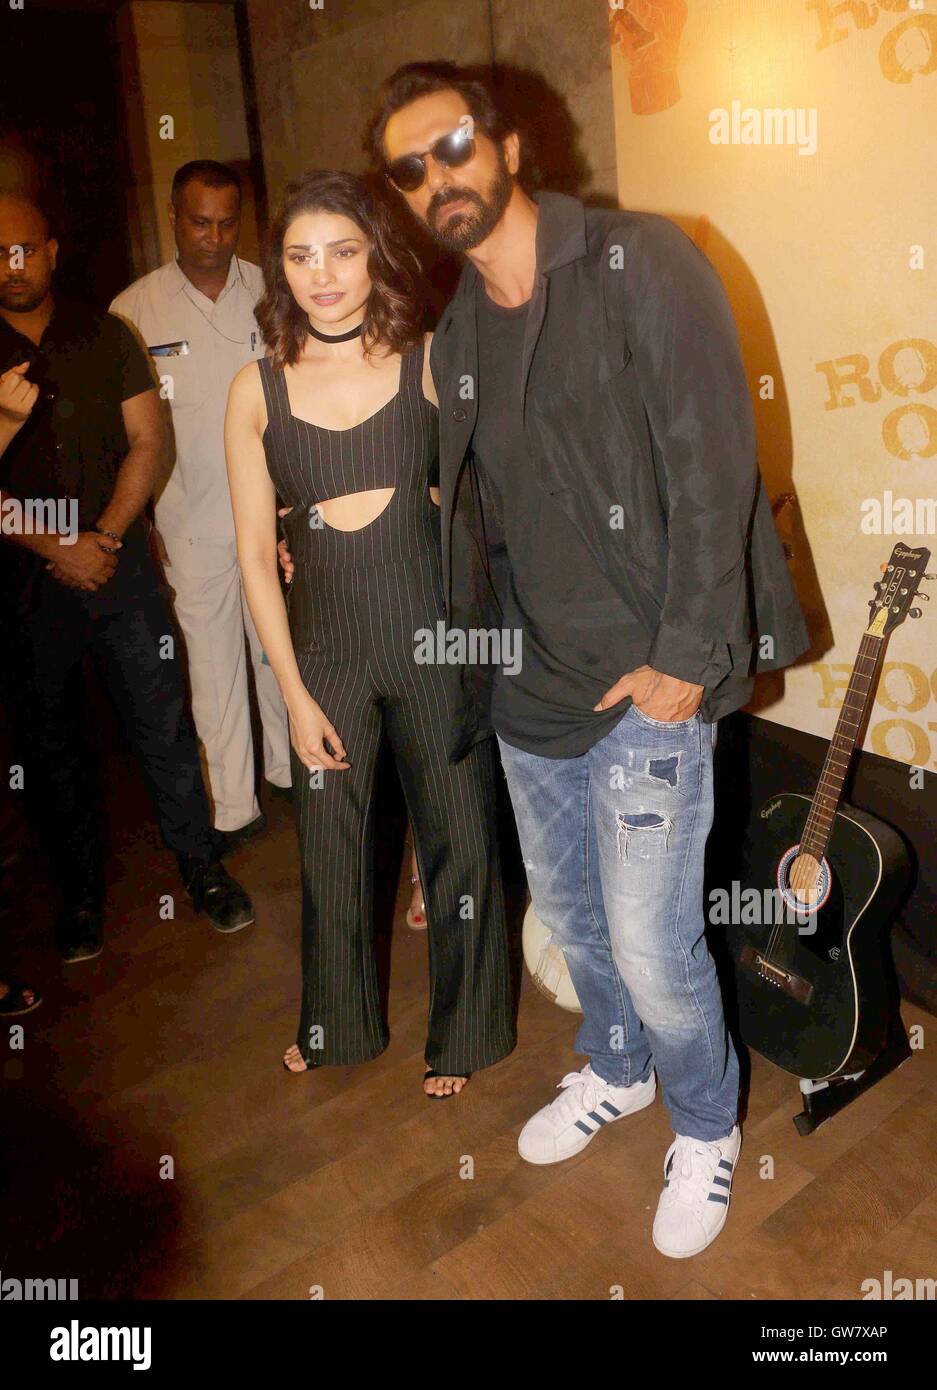 Bollywood actors Prachi Desai and Arjun Rampal during the teaser launch of film Rock On 2, in Mumbai Stock Photo